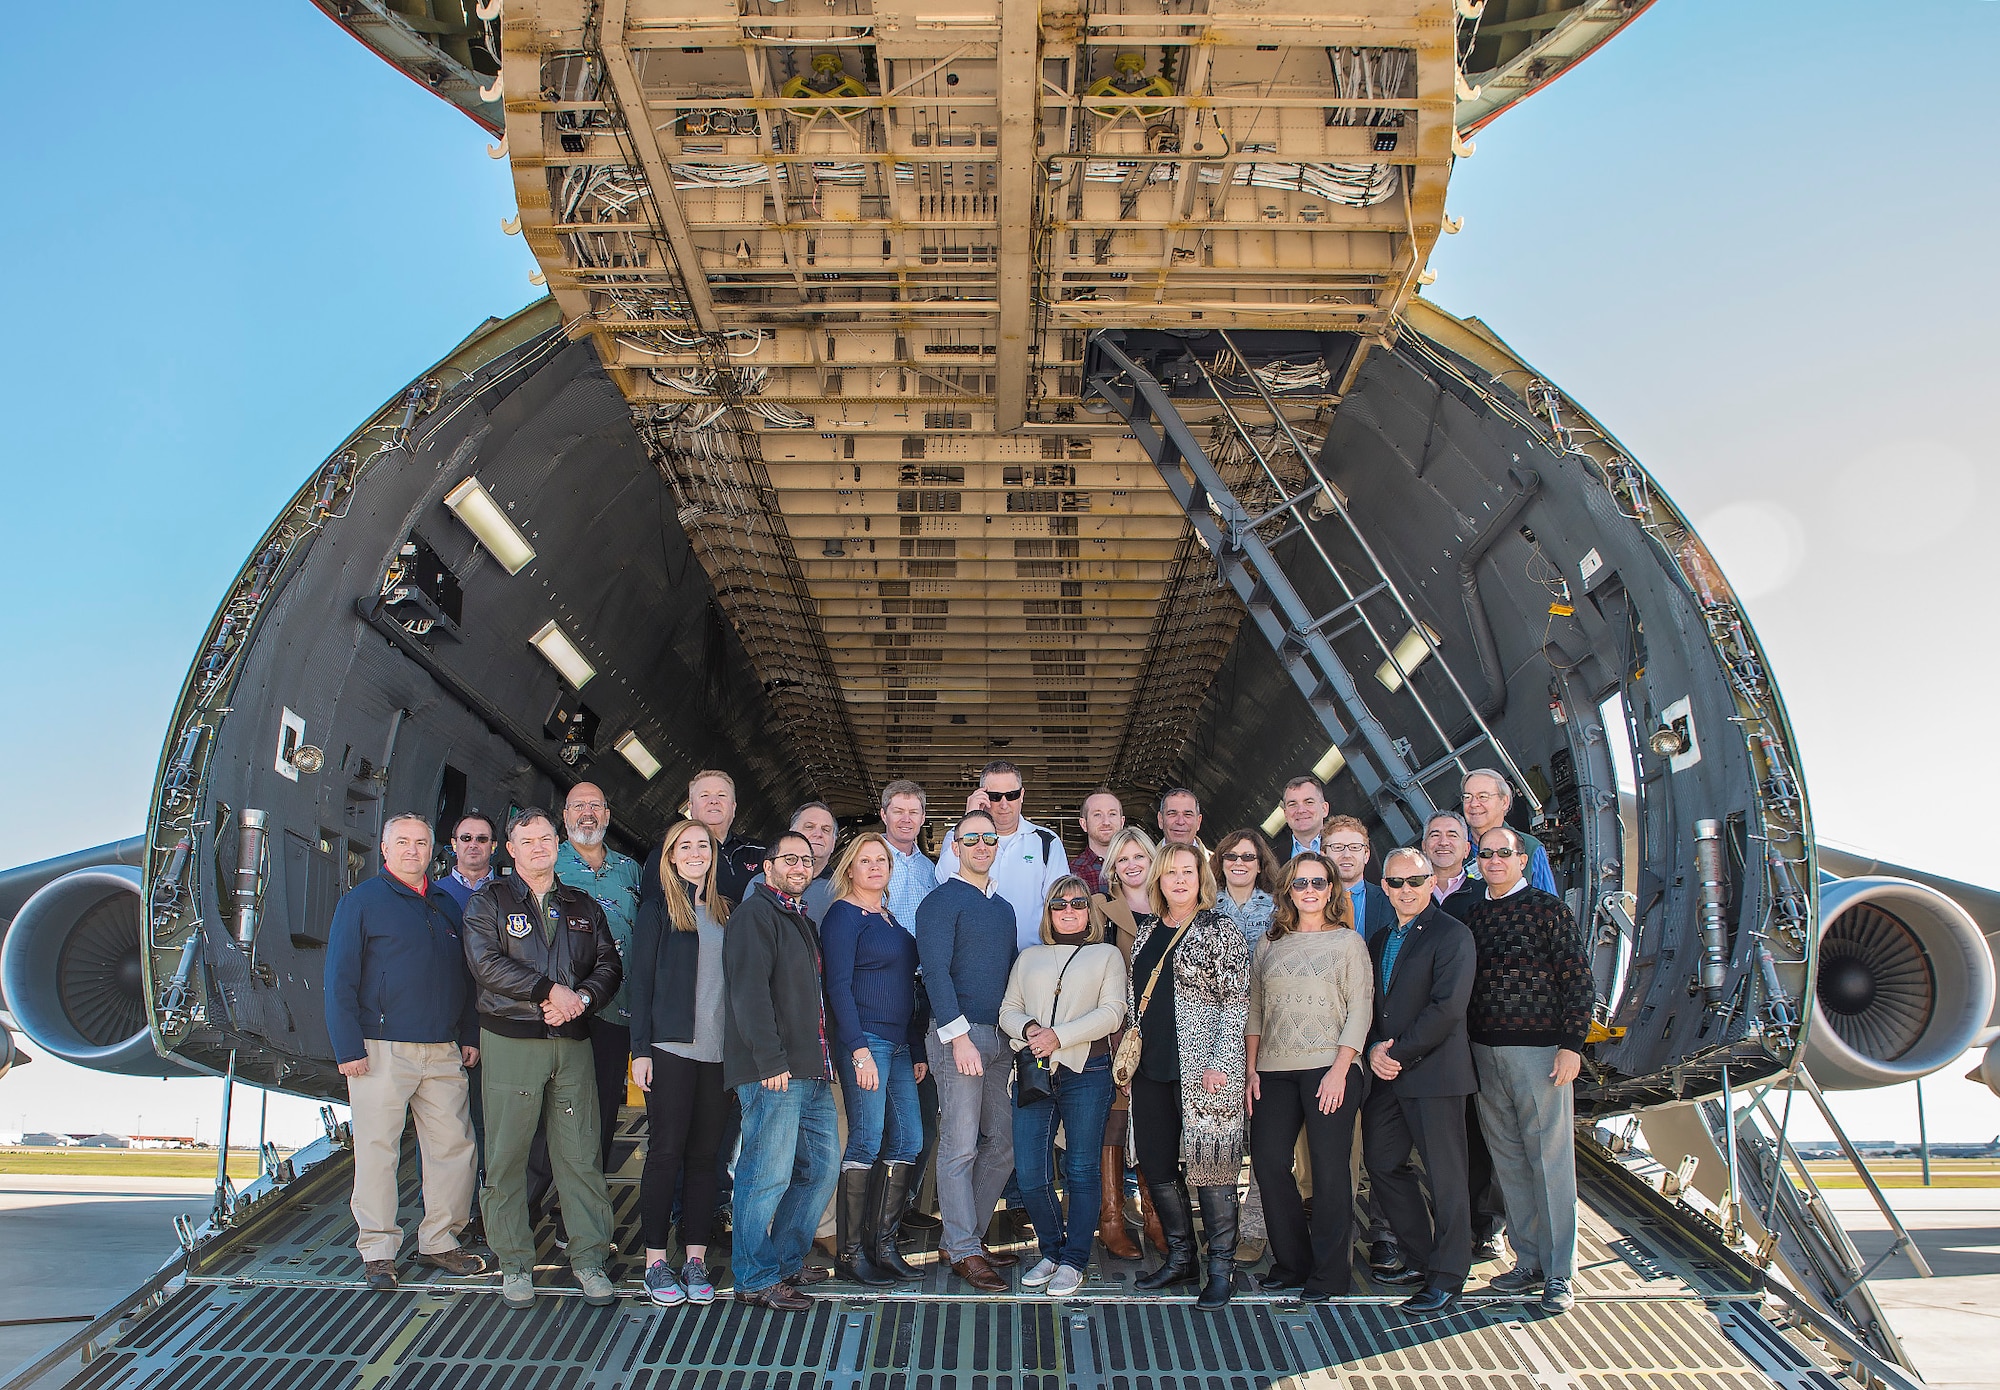 Civic leaders from Joint Base McGuire-Dix-Lakehurst stand on the ramp of a C-5M Super Galaxy aircraft Nov. 30, 2016 at Joint Base San Antonio-Lackland, Texas. The civic leaders also toured the Medical Training and Education Campus at JBSA-Ft. Sam Houston, and the Center for the Intrepid. (U.S. Air Force photo by Benjamin Fiske)